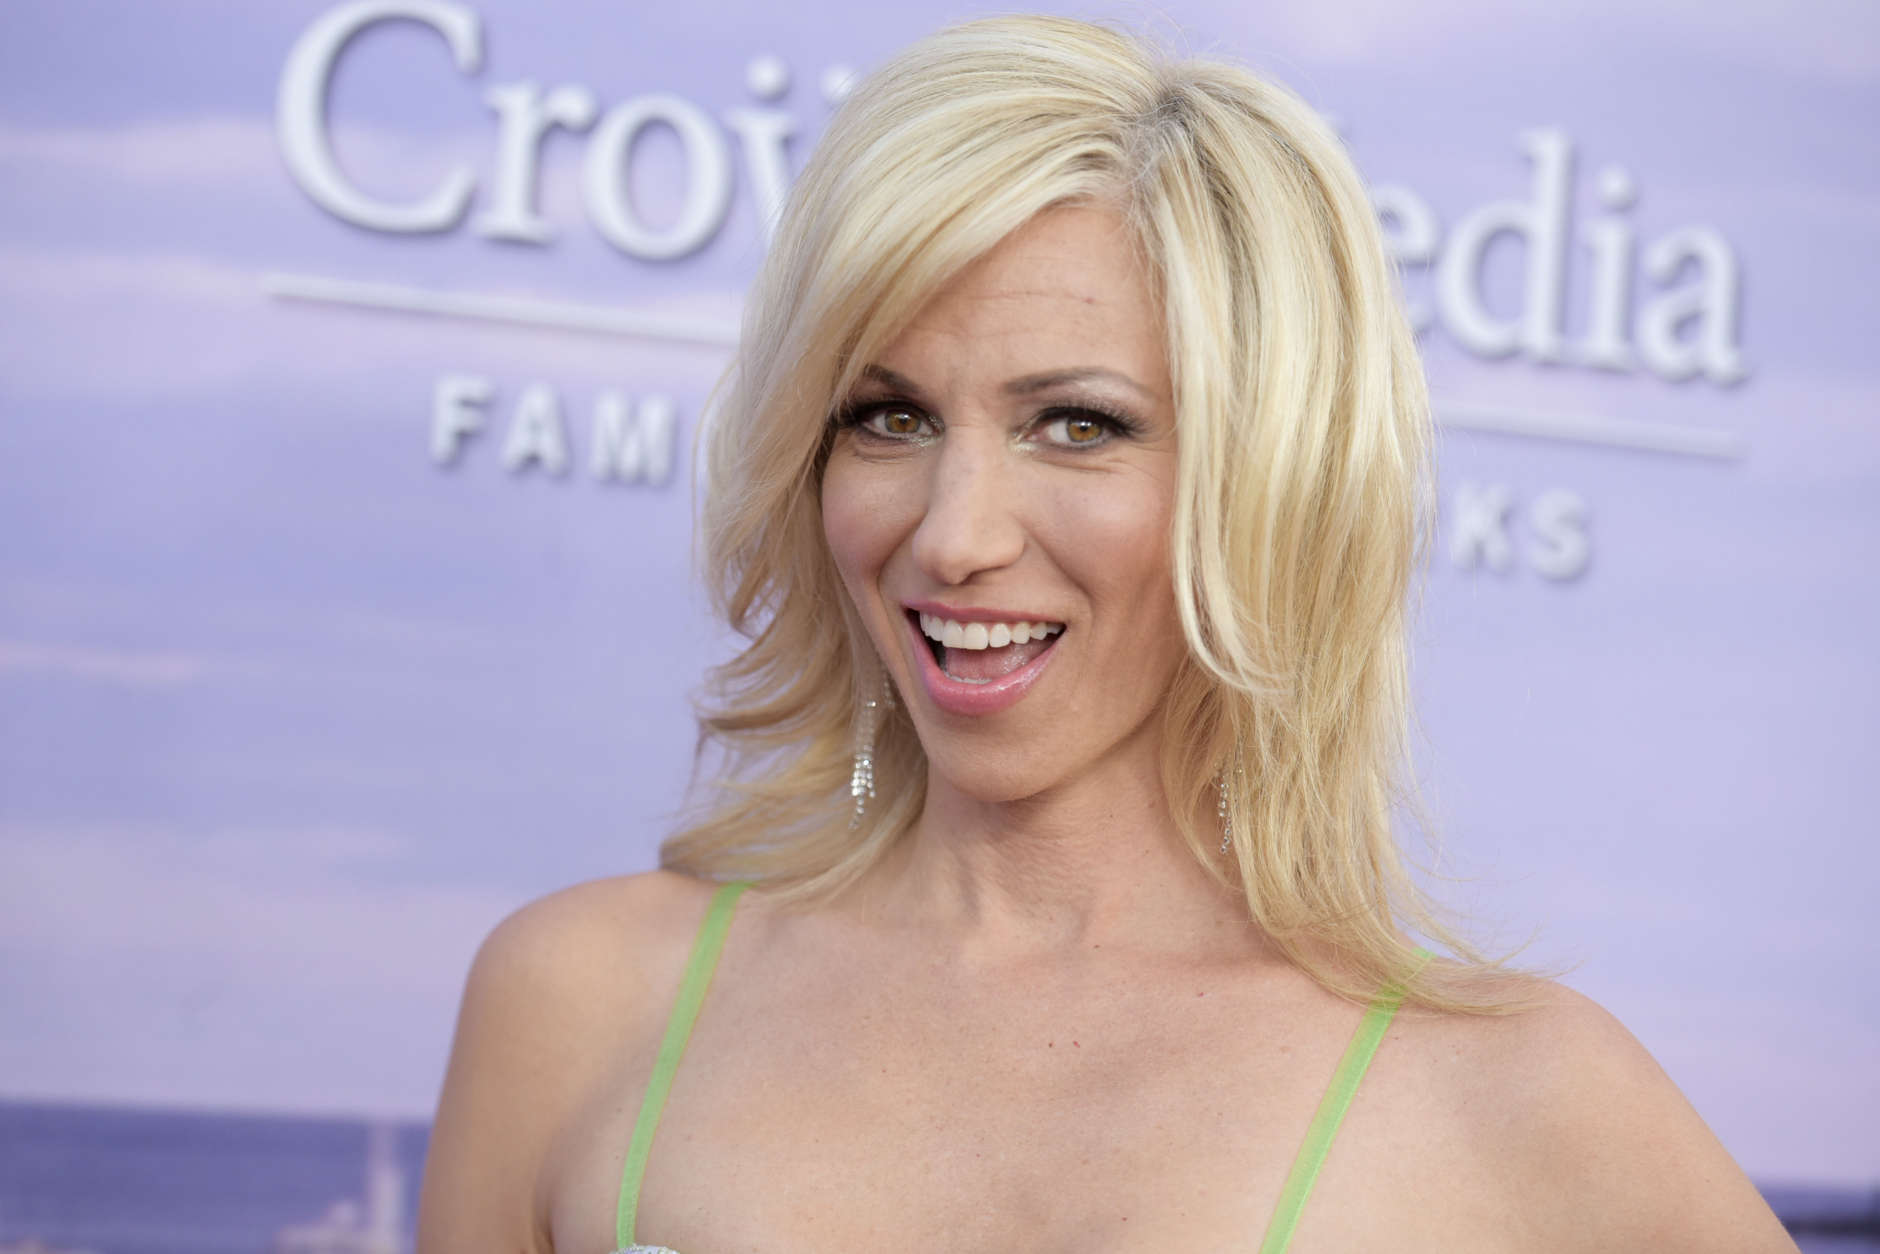 Debbie Gibson attends the 2016 Summer TCA "Hallmark Event" on Wednesday, July 27, 2016, in Beverly Hills, Calif. (Photo by Richard Shotwell/Invision/AP)